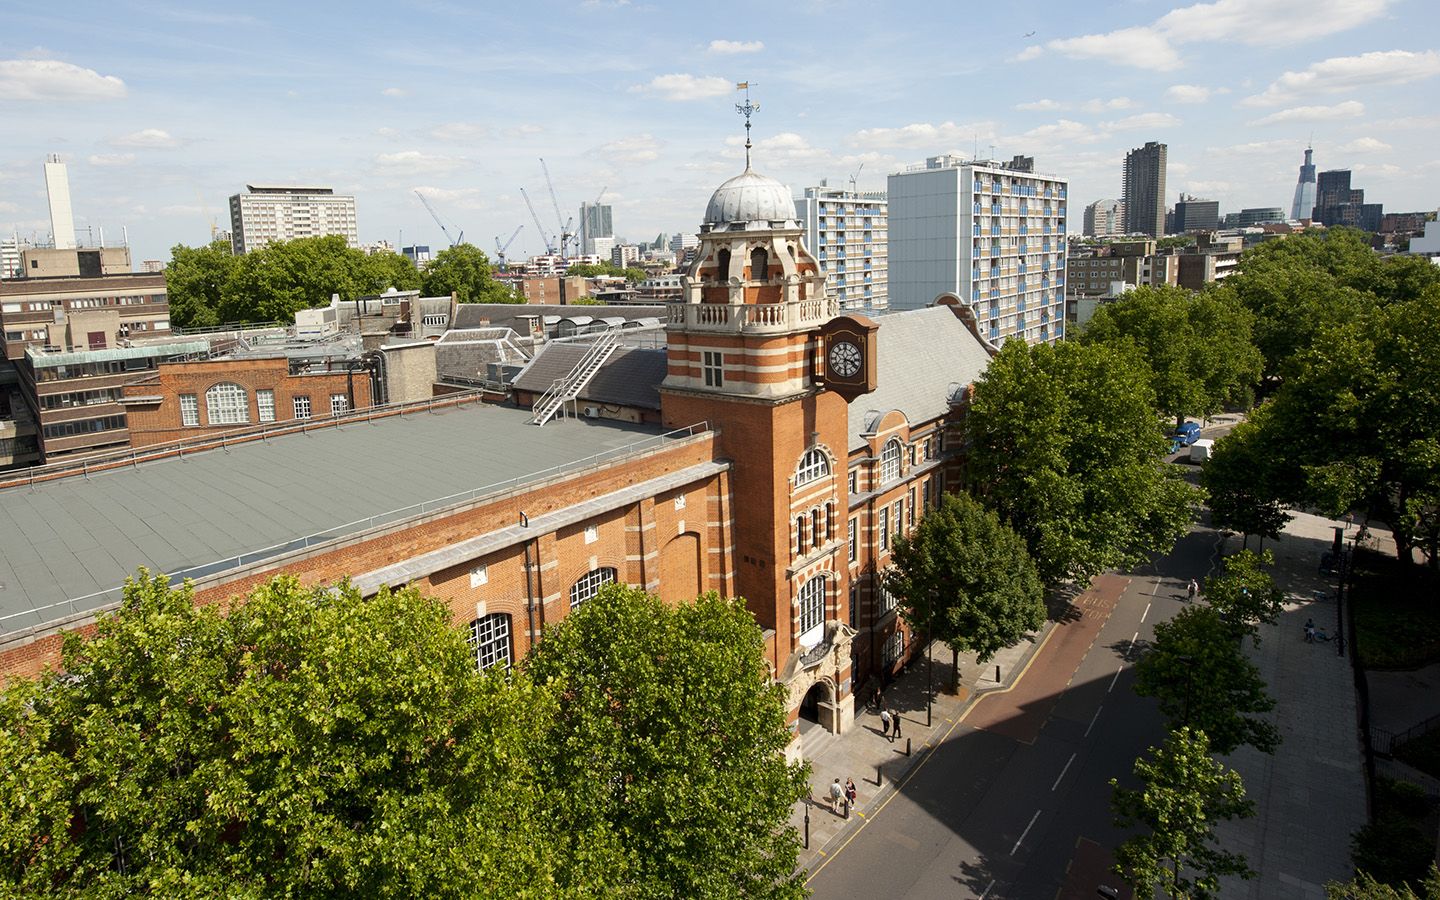 Arial view of the College Building on a sunny day, with the London skyline in the distance.